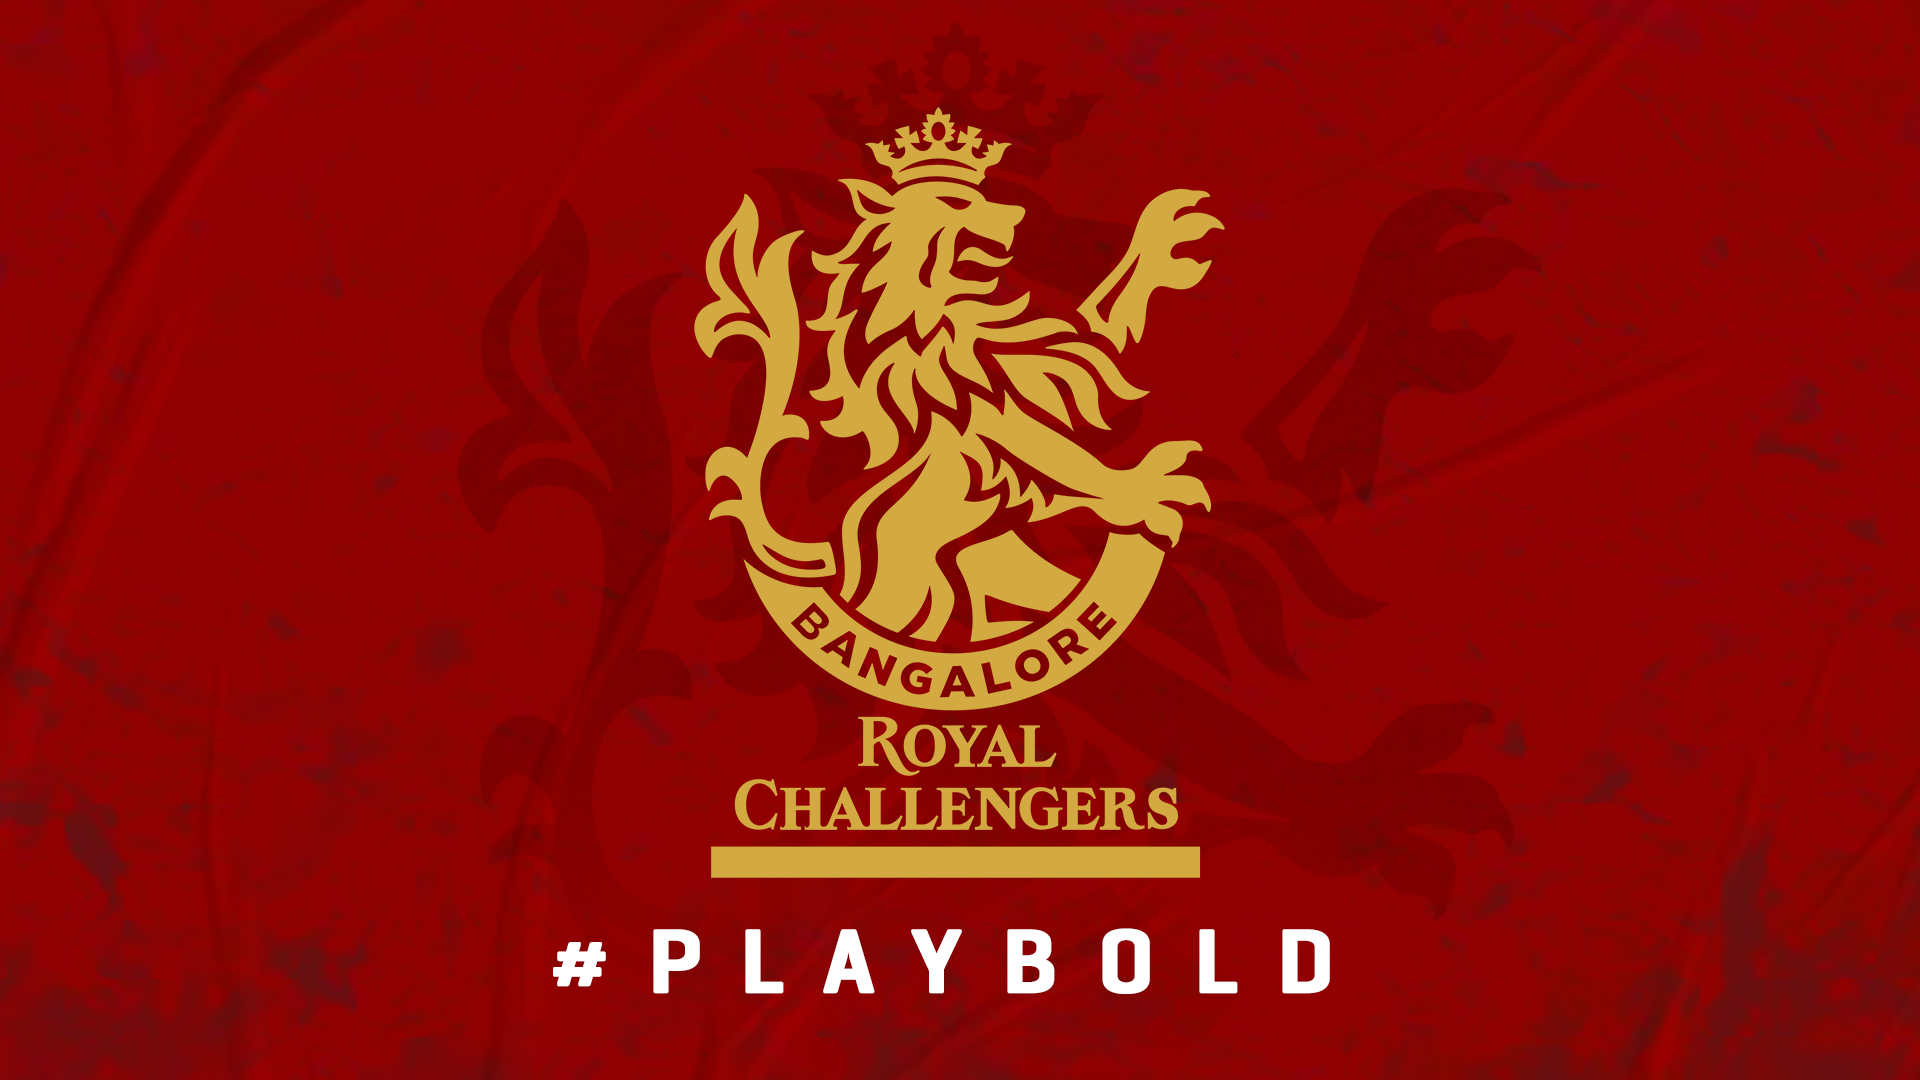 About Us | Royal Challengers Bangalore